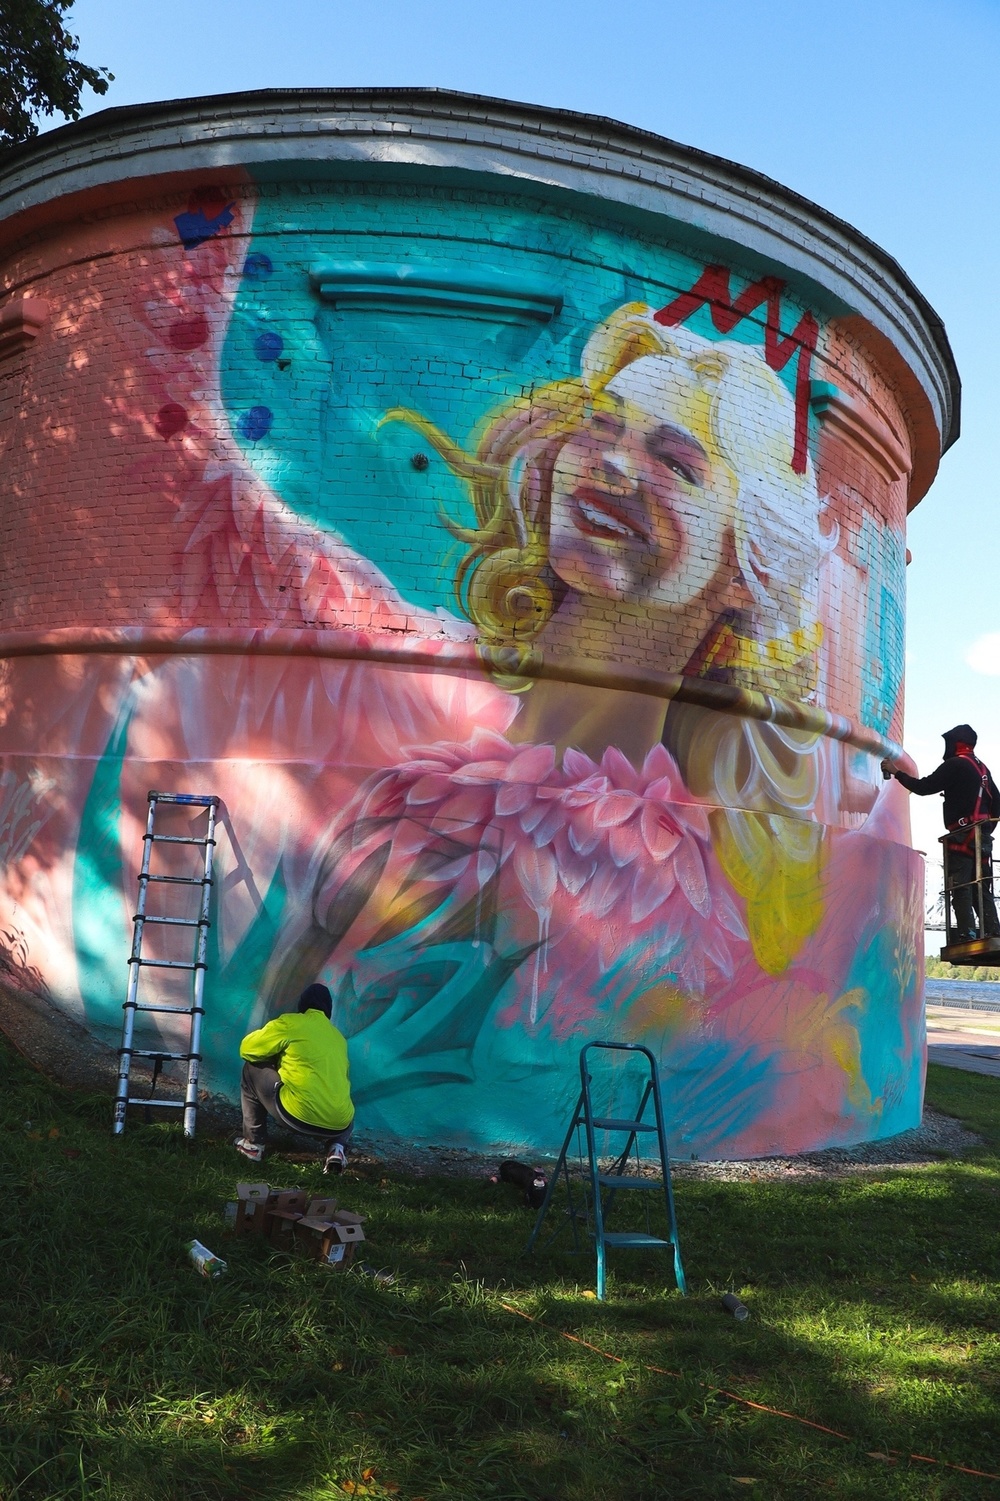 Yaroslavl cities were decorated with colorful graffiti